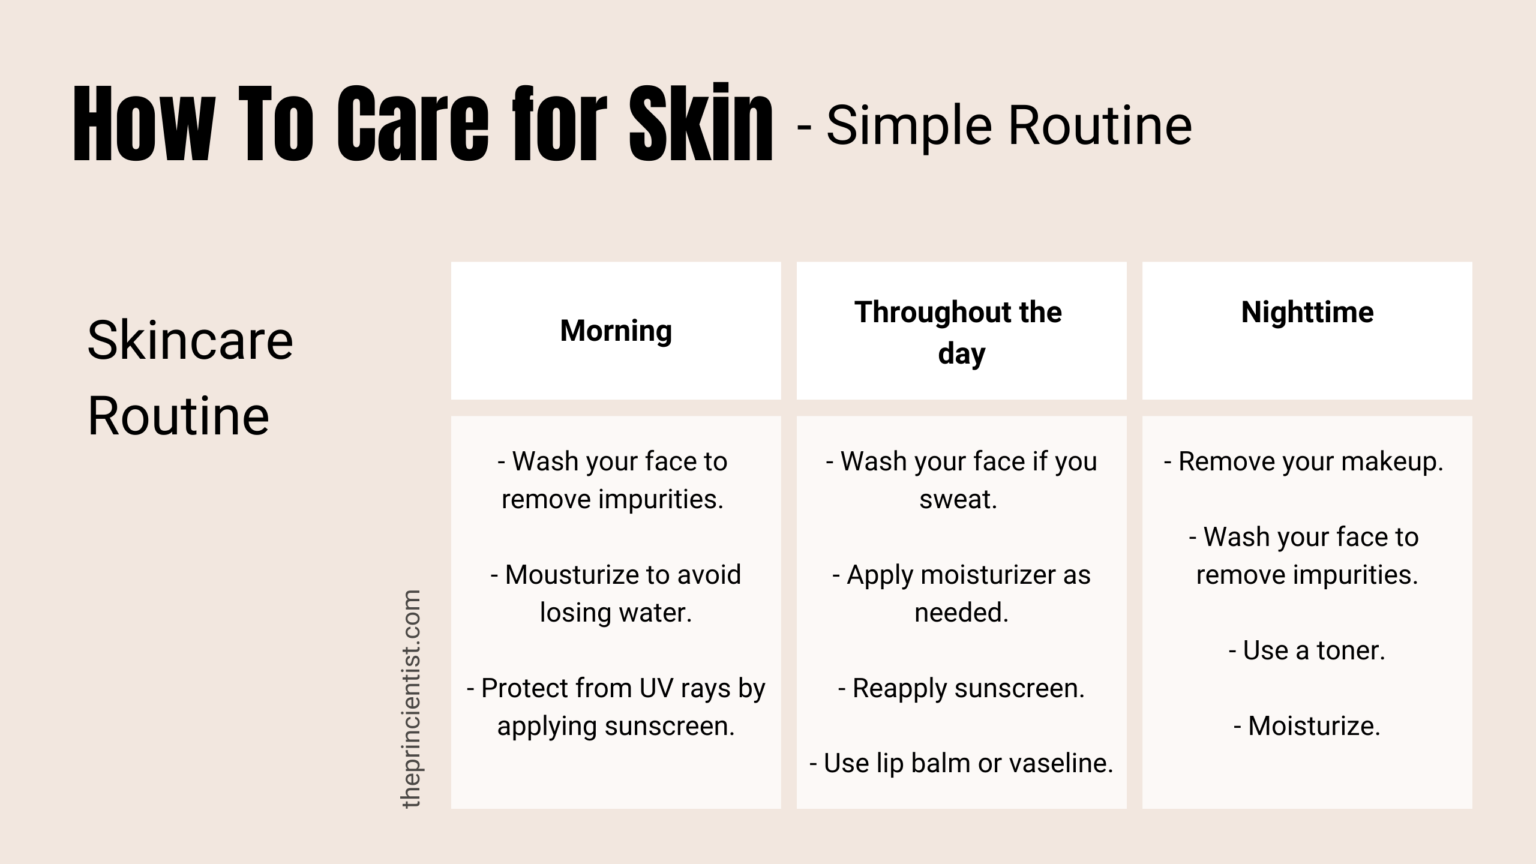 how to care for skin - steps to care for your skin in the mroning, throughout the day and at night